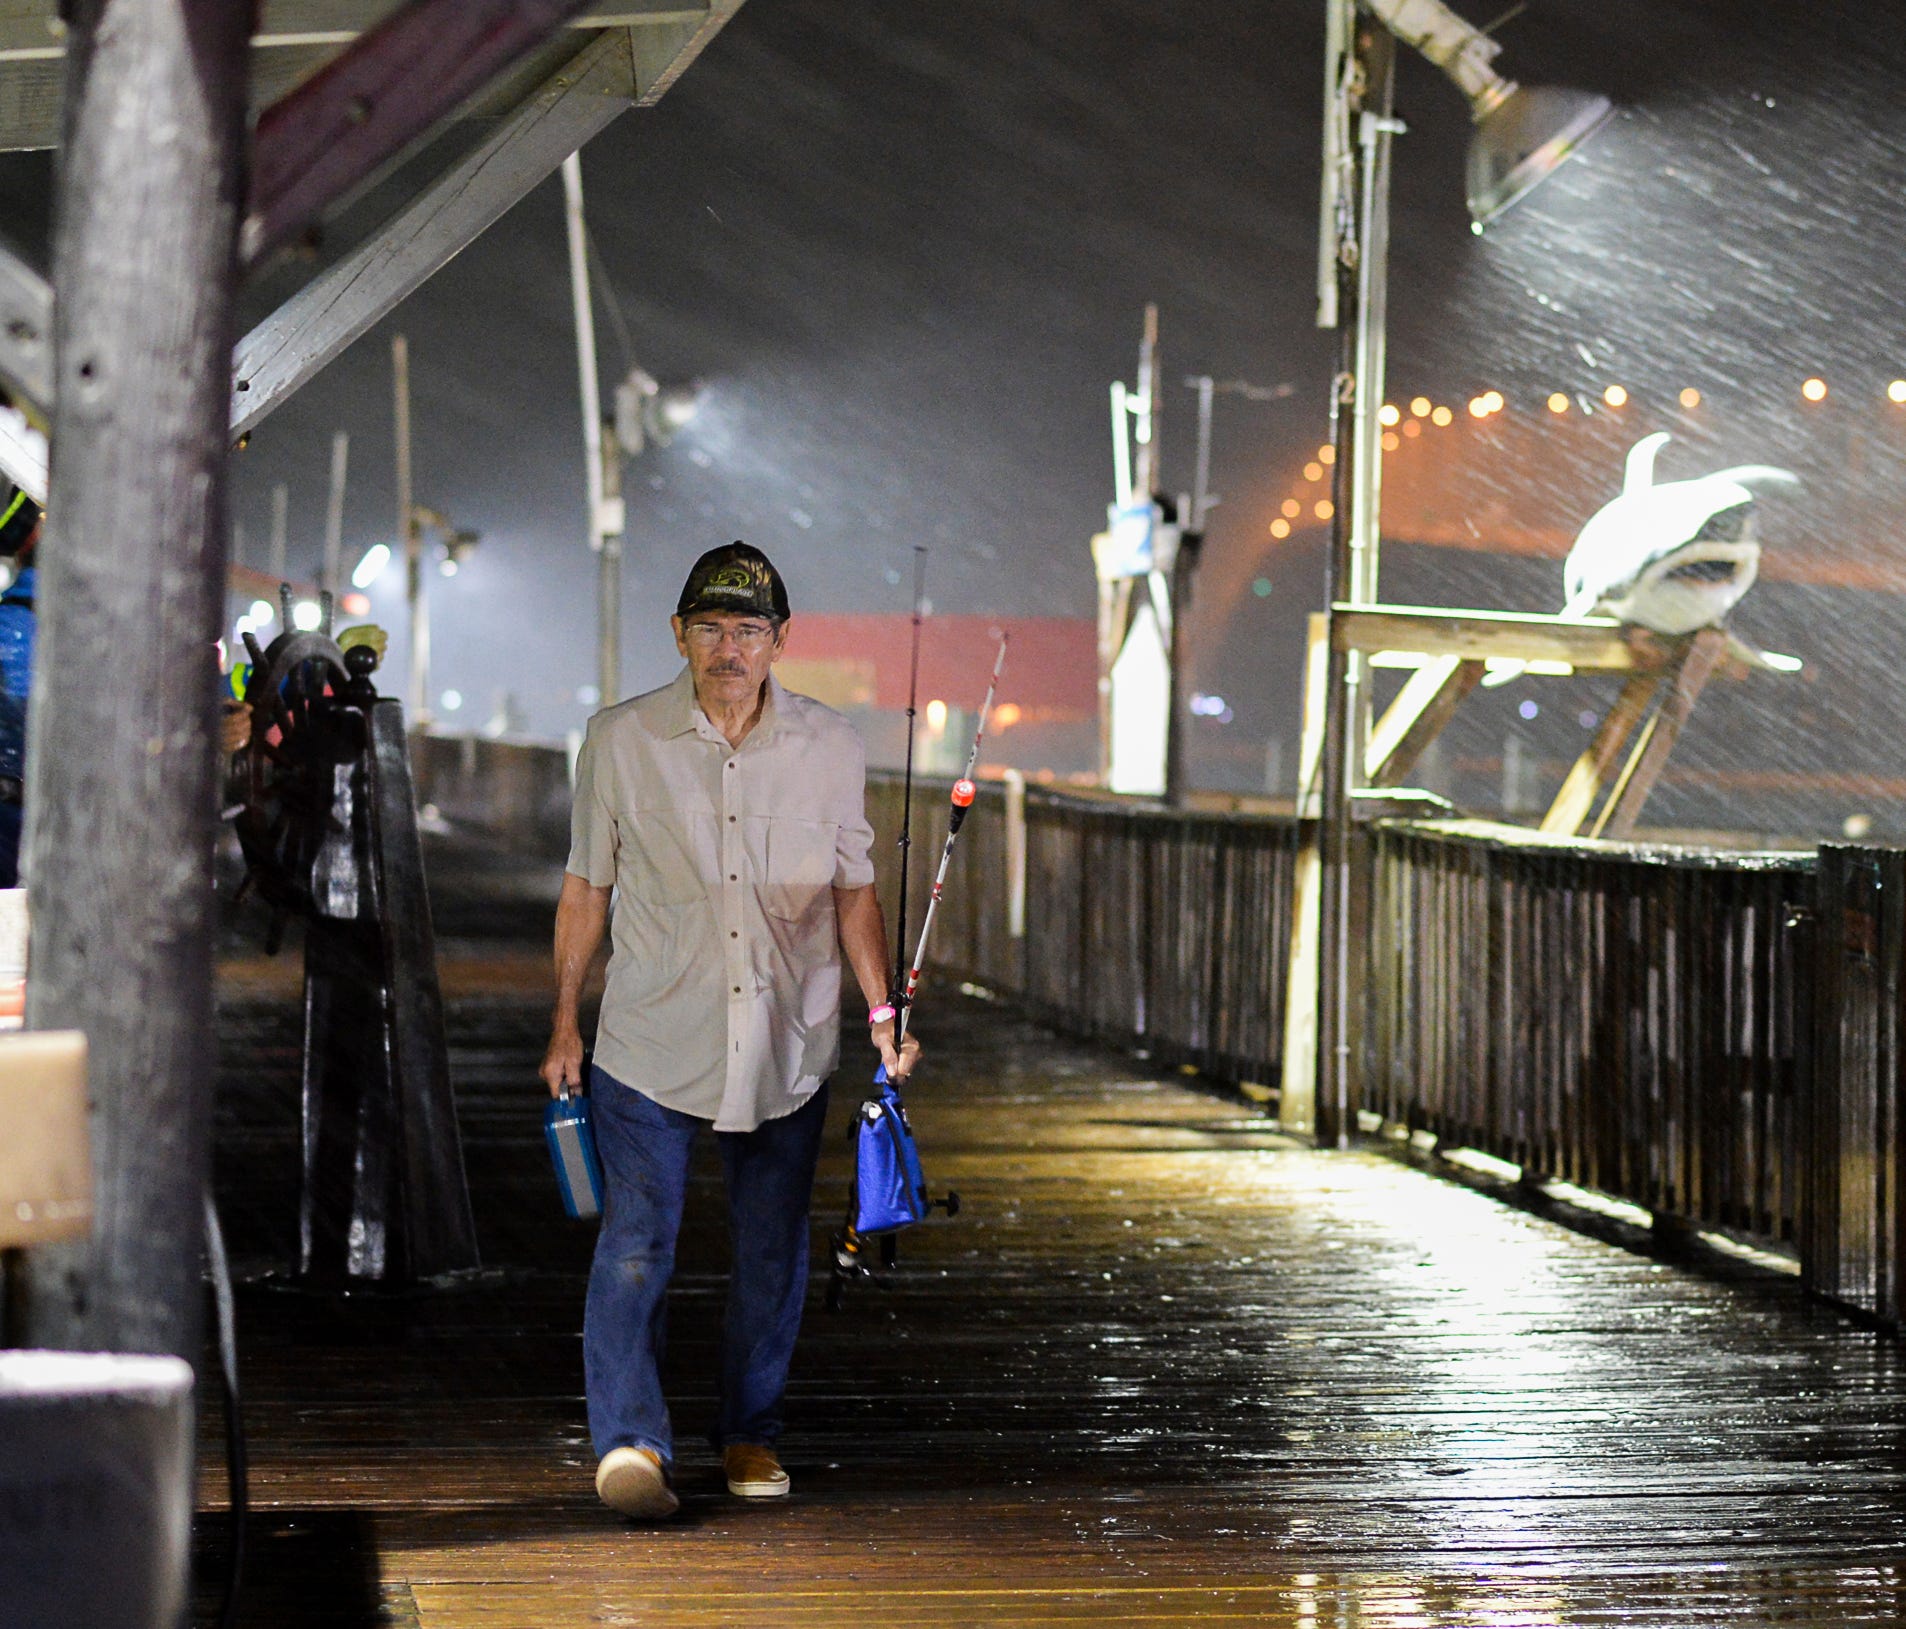 Rogelio Ortiz makes his way off the Pirate's Landing Fishing Pier as rain from Hurricane Harvey falls on Thursday, Aug. 24, 2017, in Port Isabel, Texas.